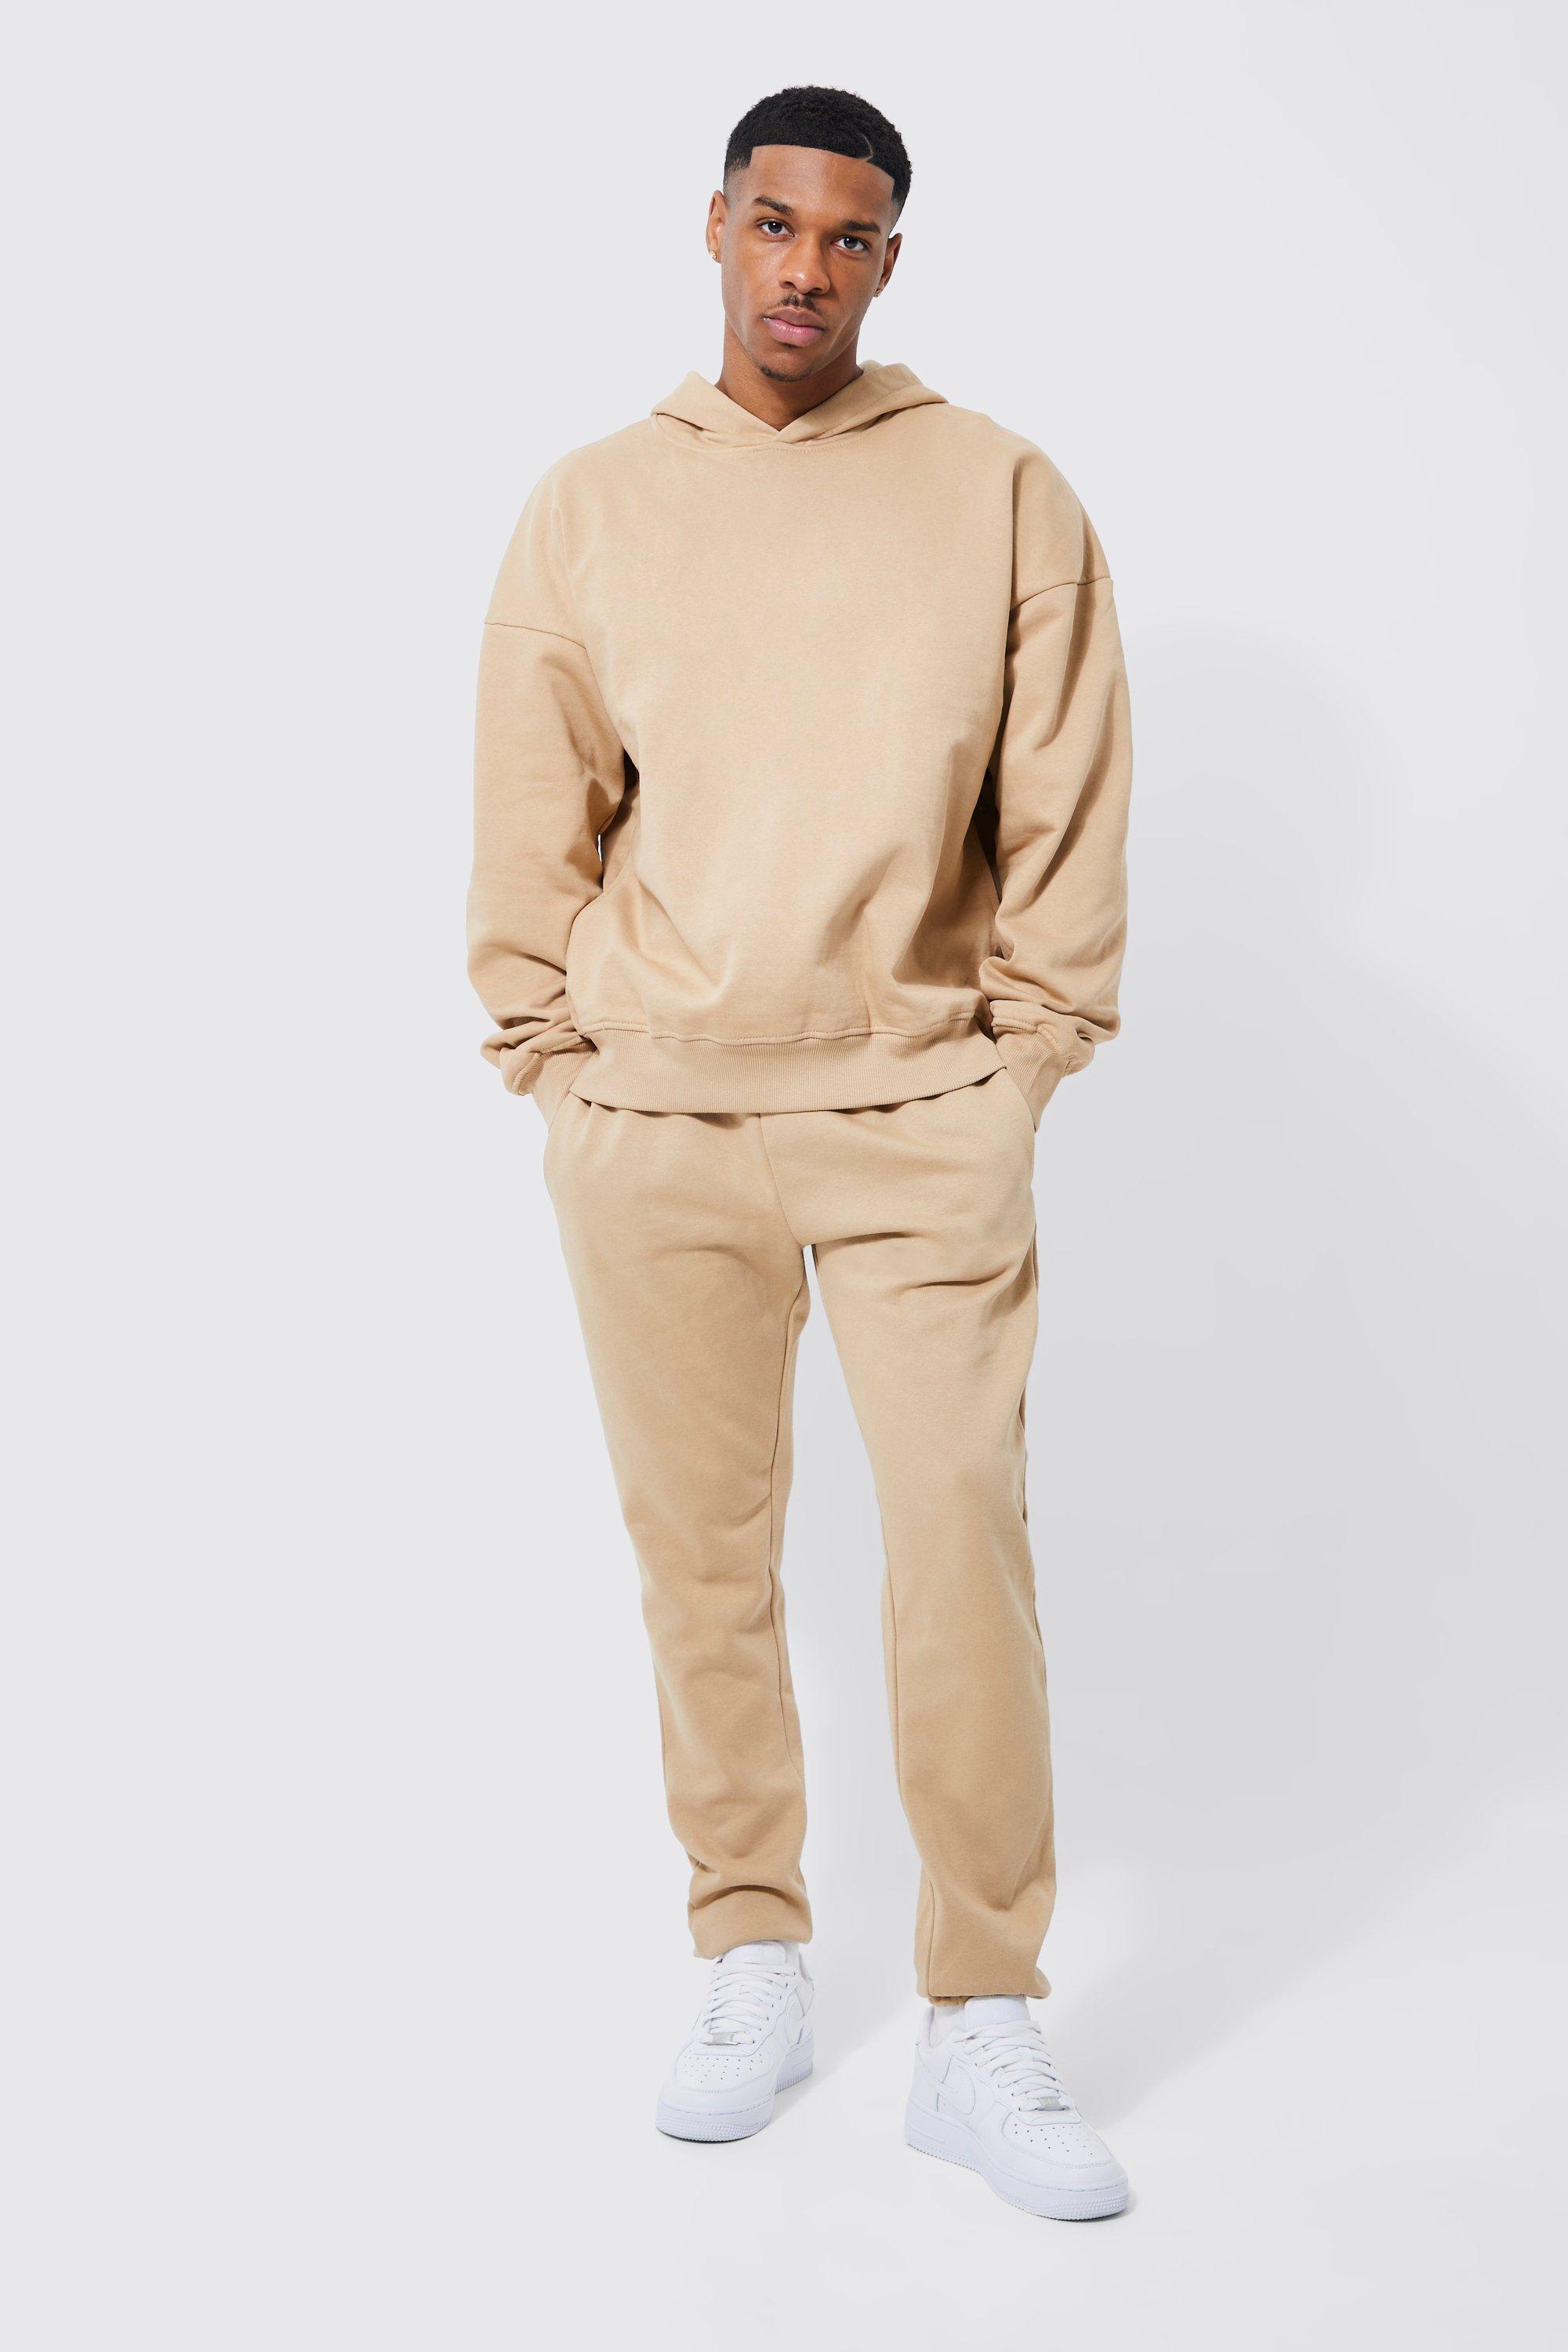 BoohooMAN Heavyweight Oversized Hooded Tracksuit in Natural for Men | Lyst